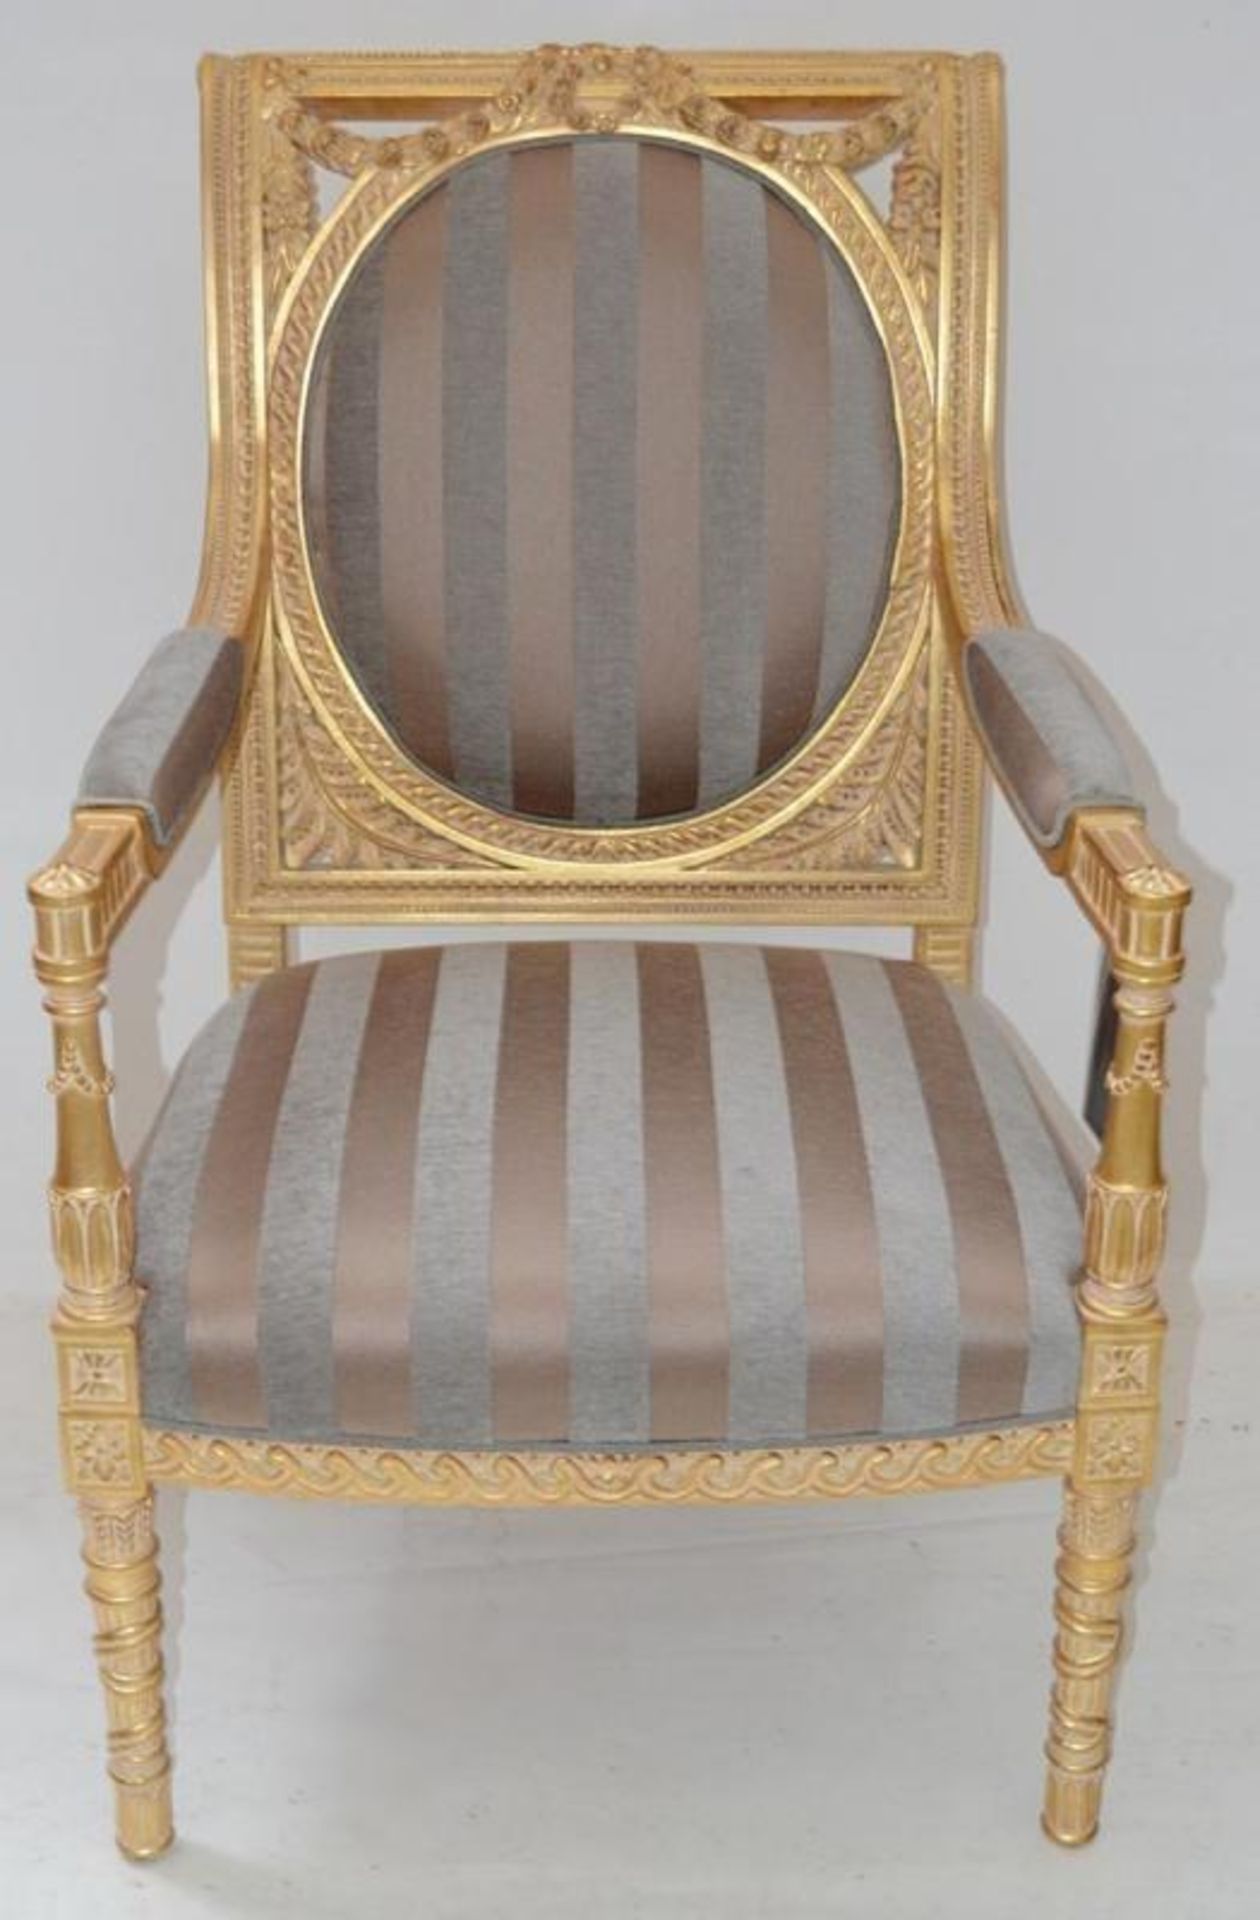 1 x DURESTA Flavia Chair - Features A Hand-Carved Hard Wood Frame With Hand-Stitched Coil Sprung Sea - Image 13 of 16